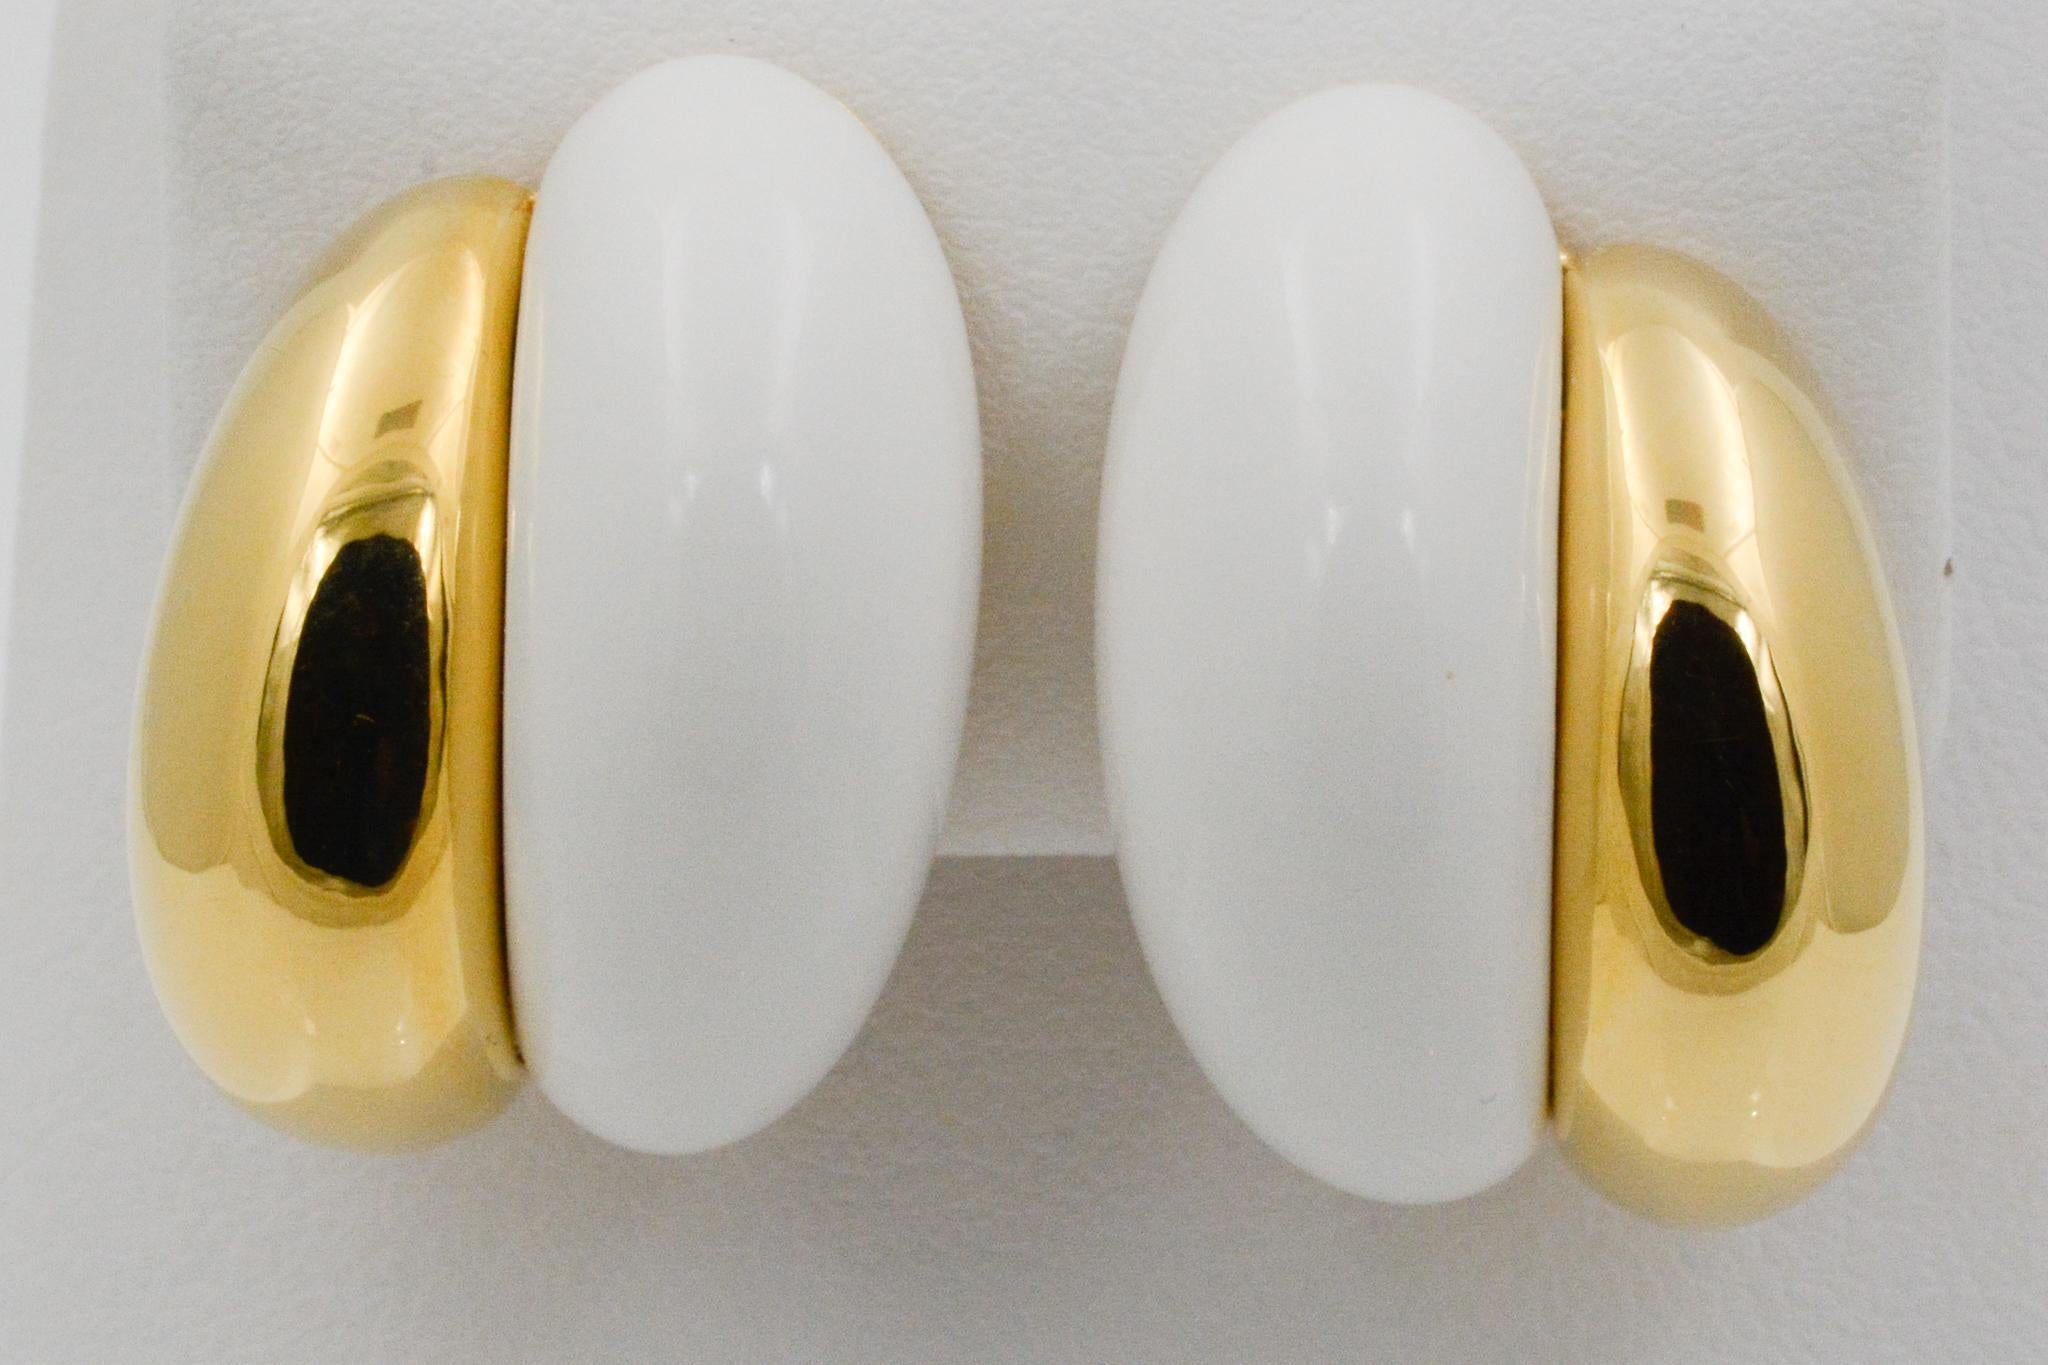 From Seaman Schepps, these Silhouette earrings feature white ceramic and 18k yellow gold in a polished finish with clip backs. Signed Seaman Schepps.